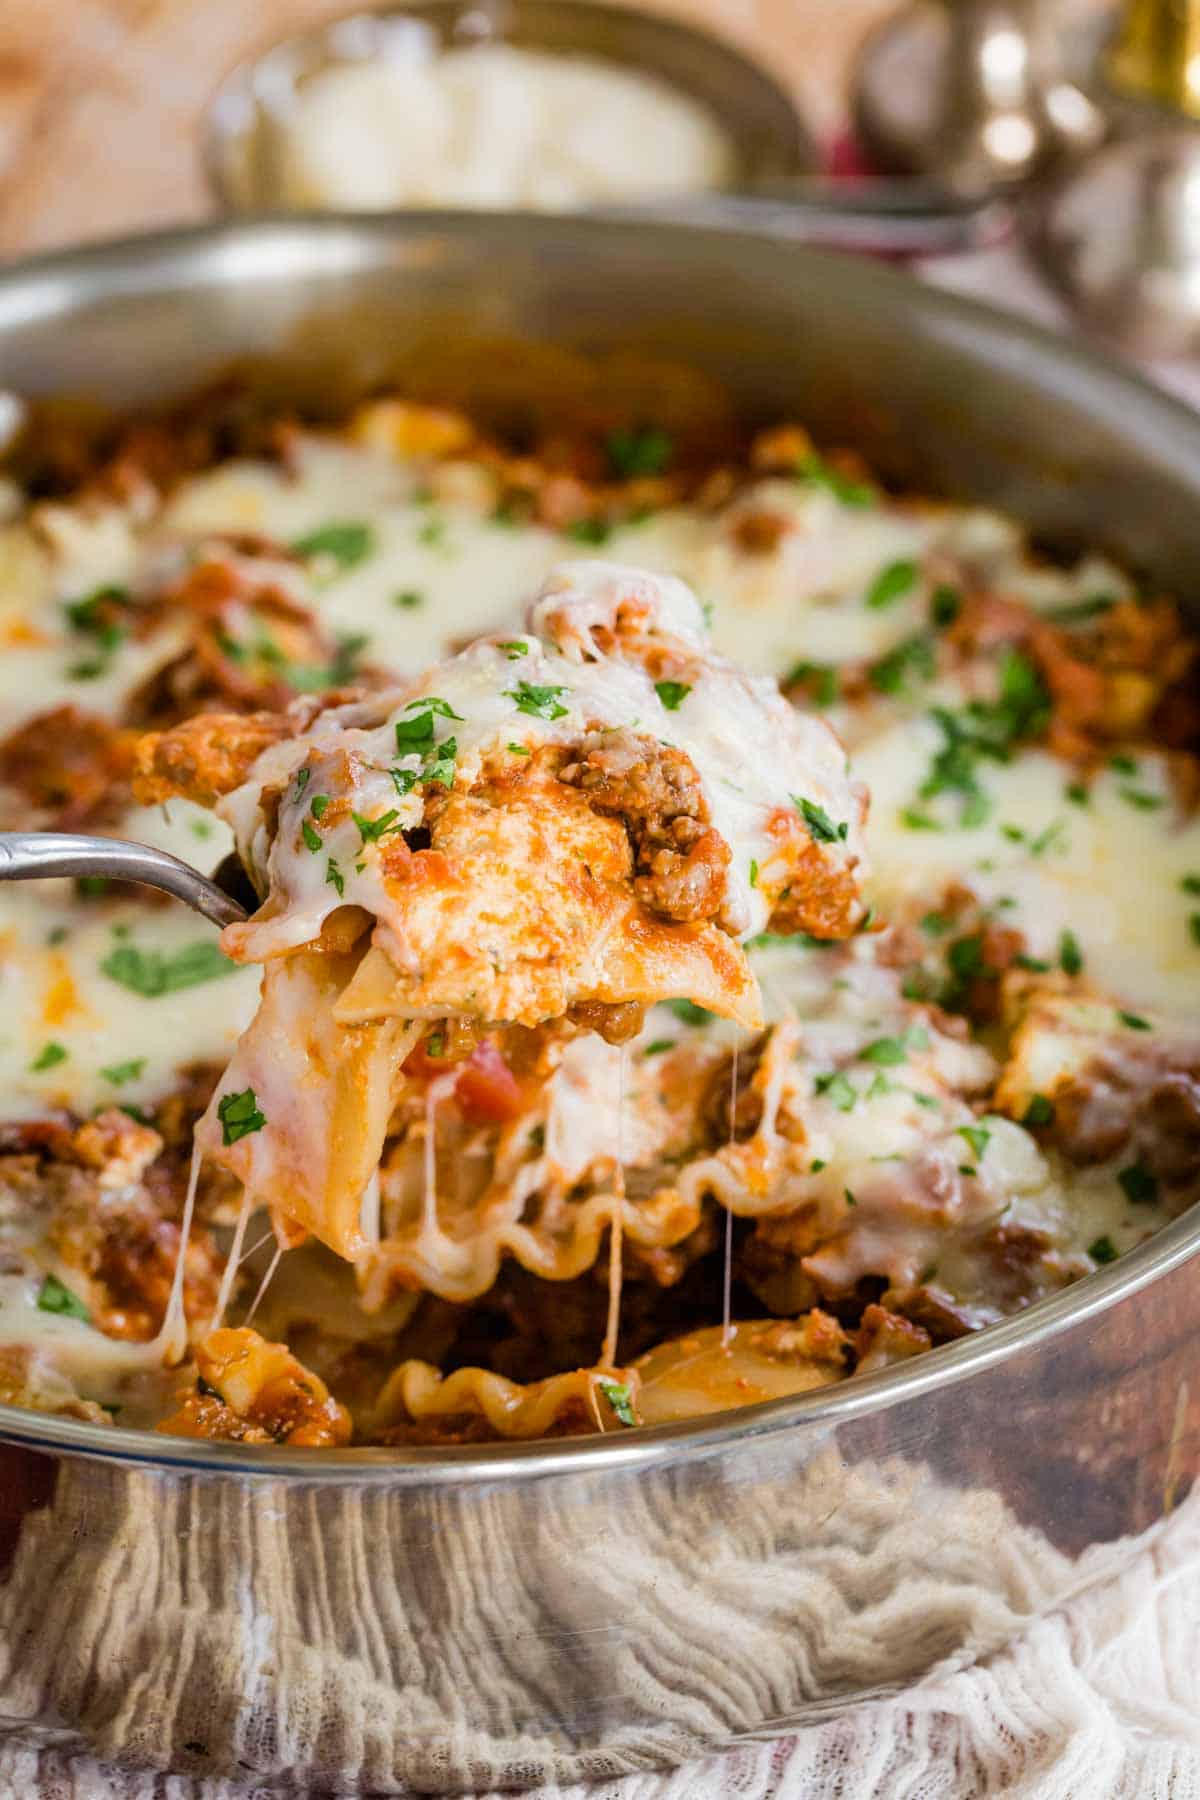 A scoop of gluten-free lasagna lifted out of a skillet, with strings of cheese.